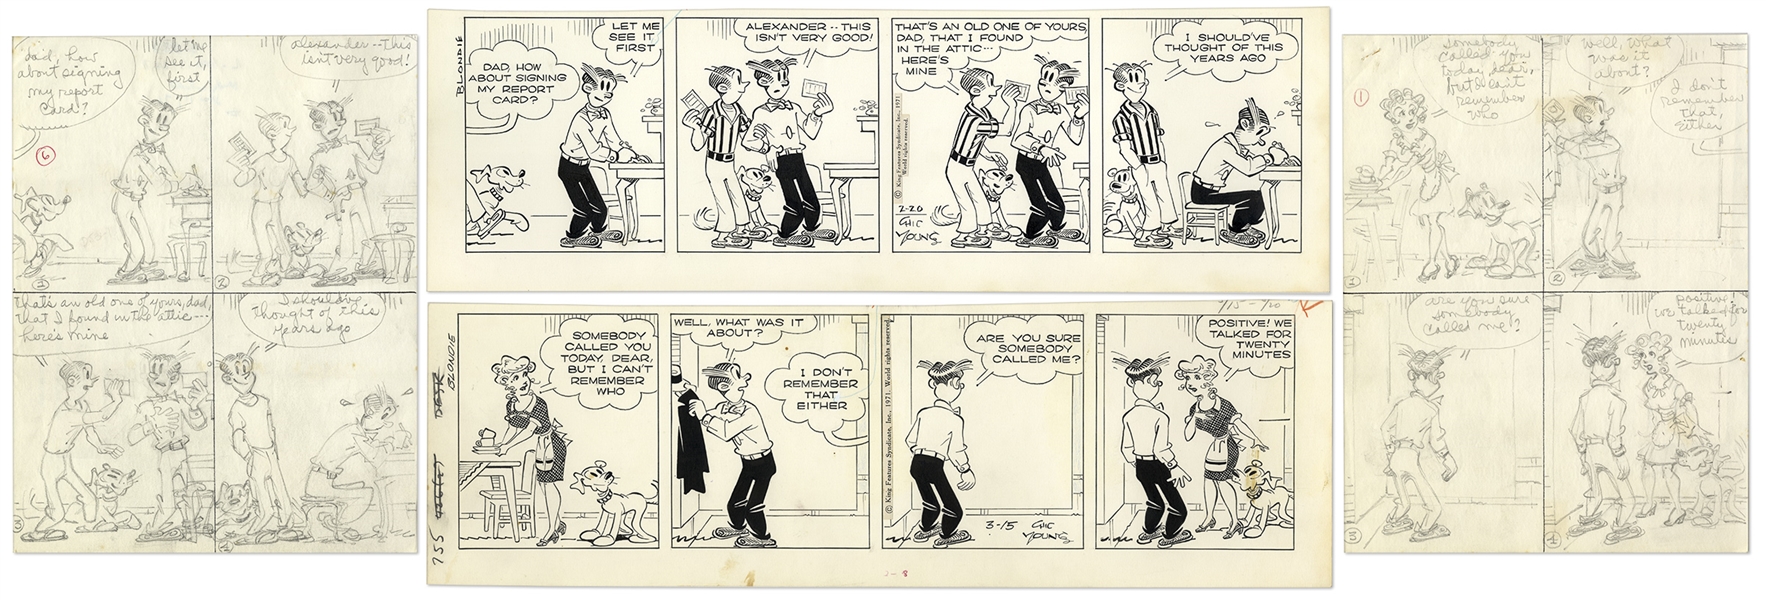 2 Chic Young Hand-Drawn ''Blondie'' Comic Strips From 1971 -- With Chic Young's Original Preliminary Artwork for Both